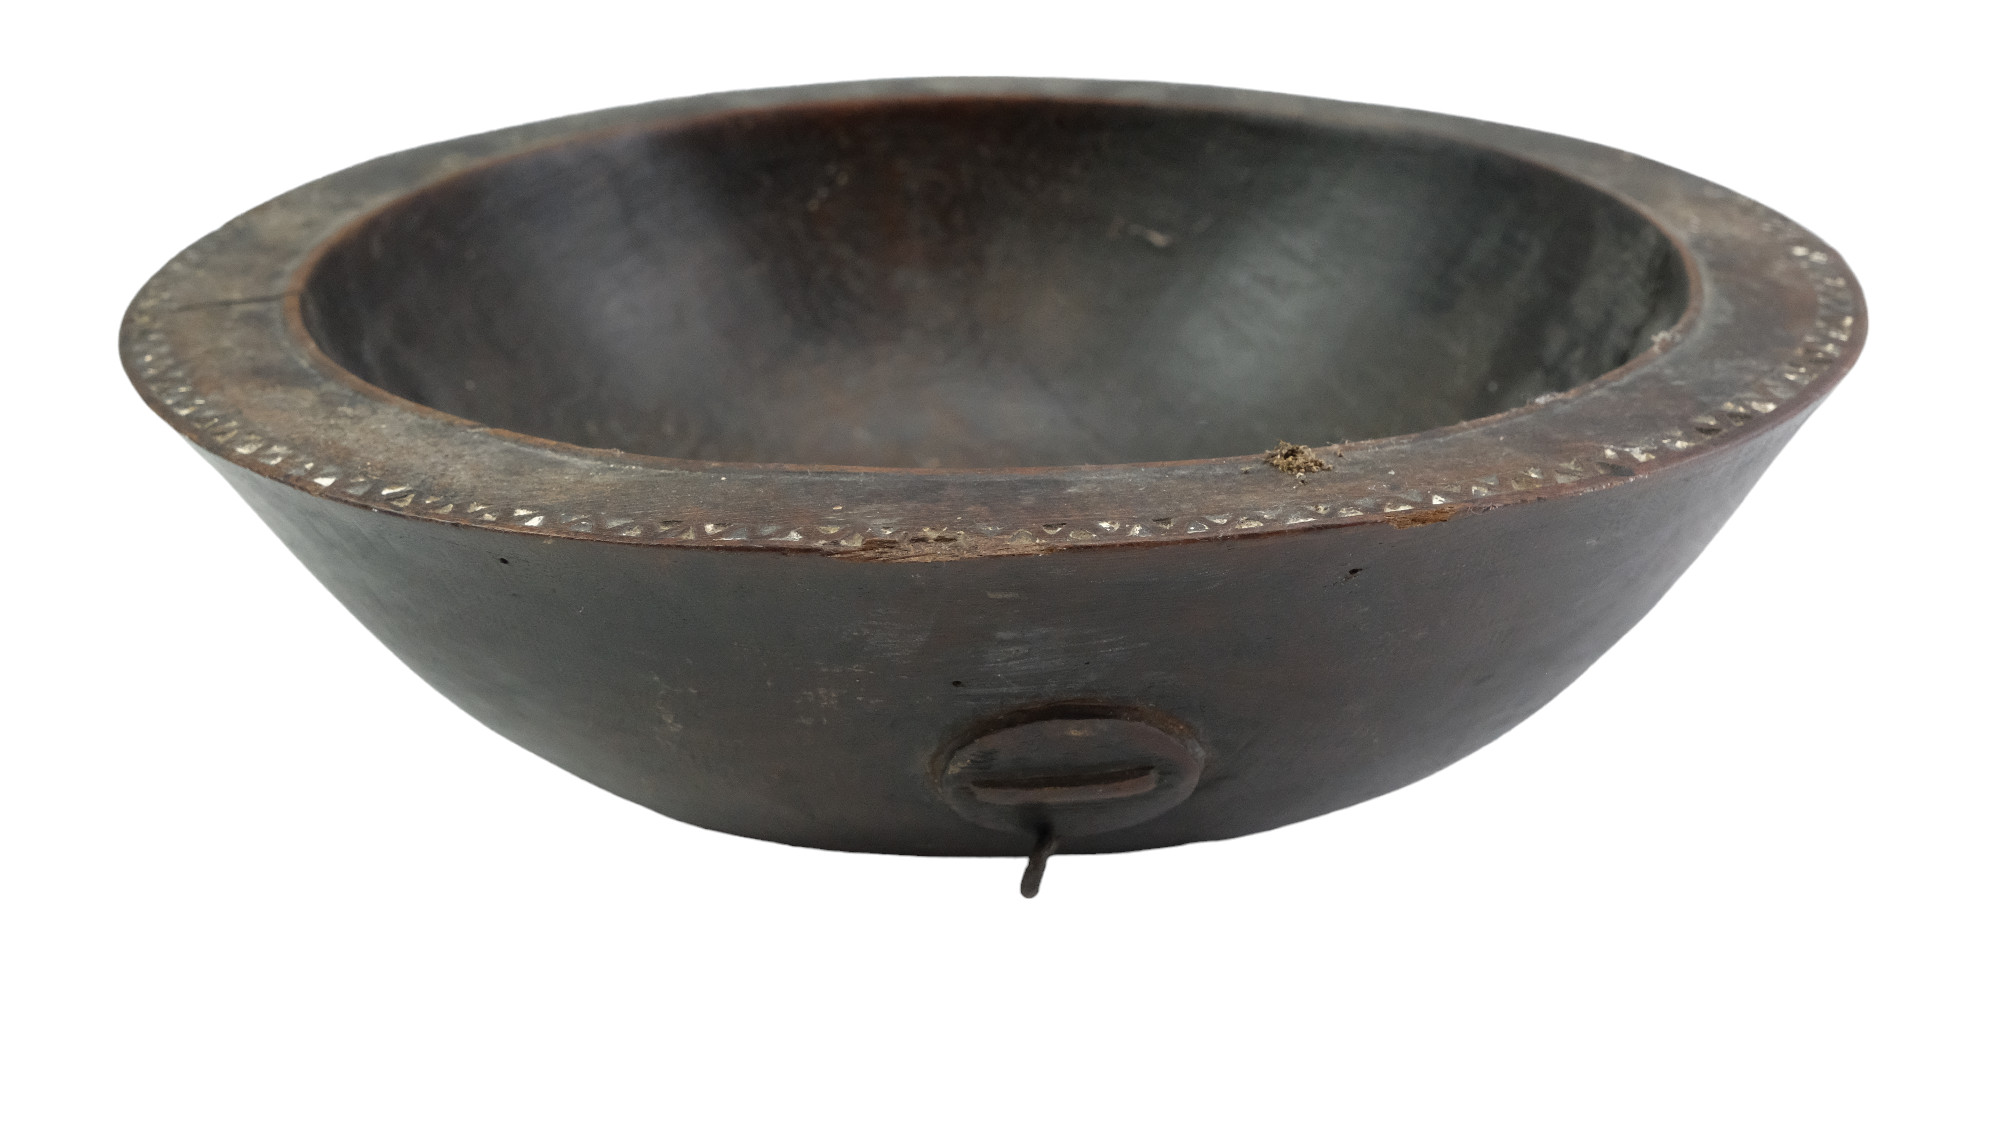 An antique African carved hardwood bowl, its planar rim having an inner cockbead and outer chip-